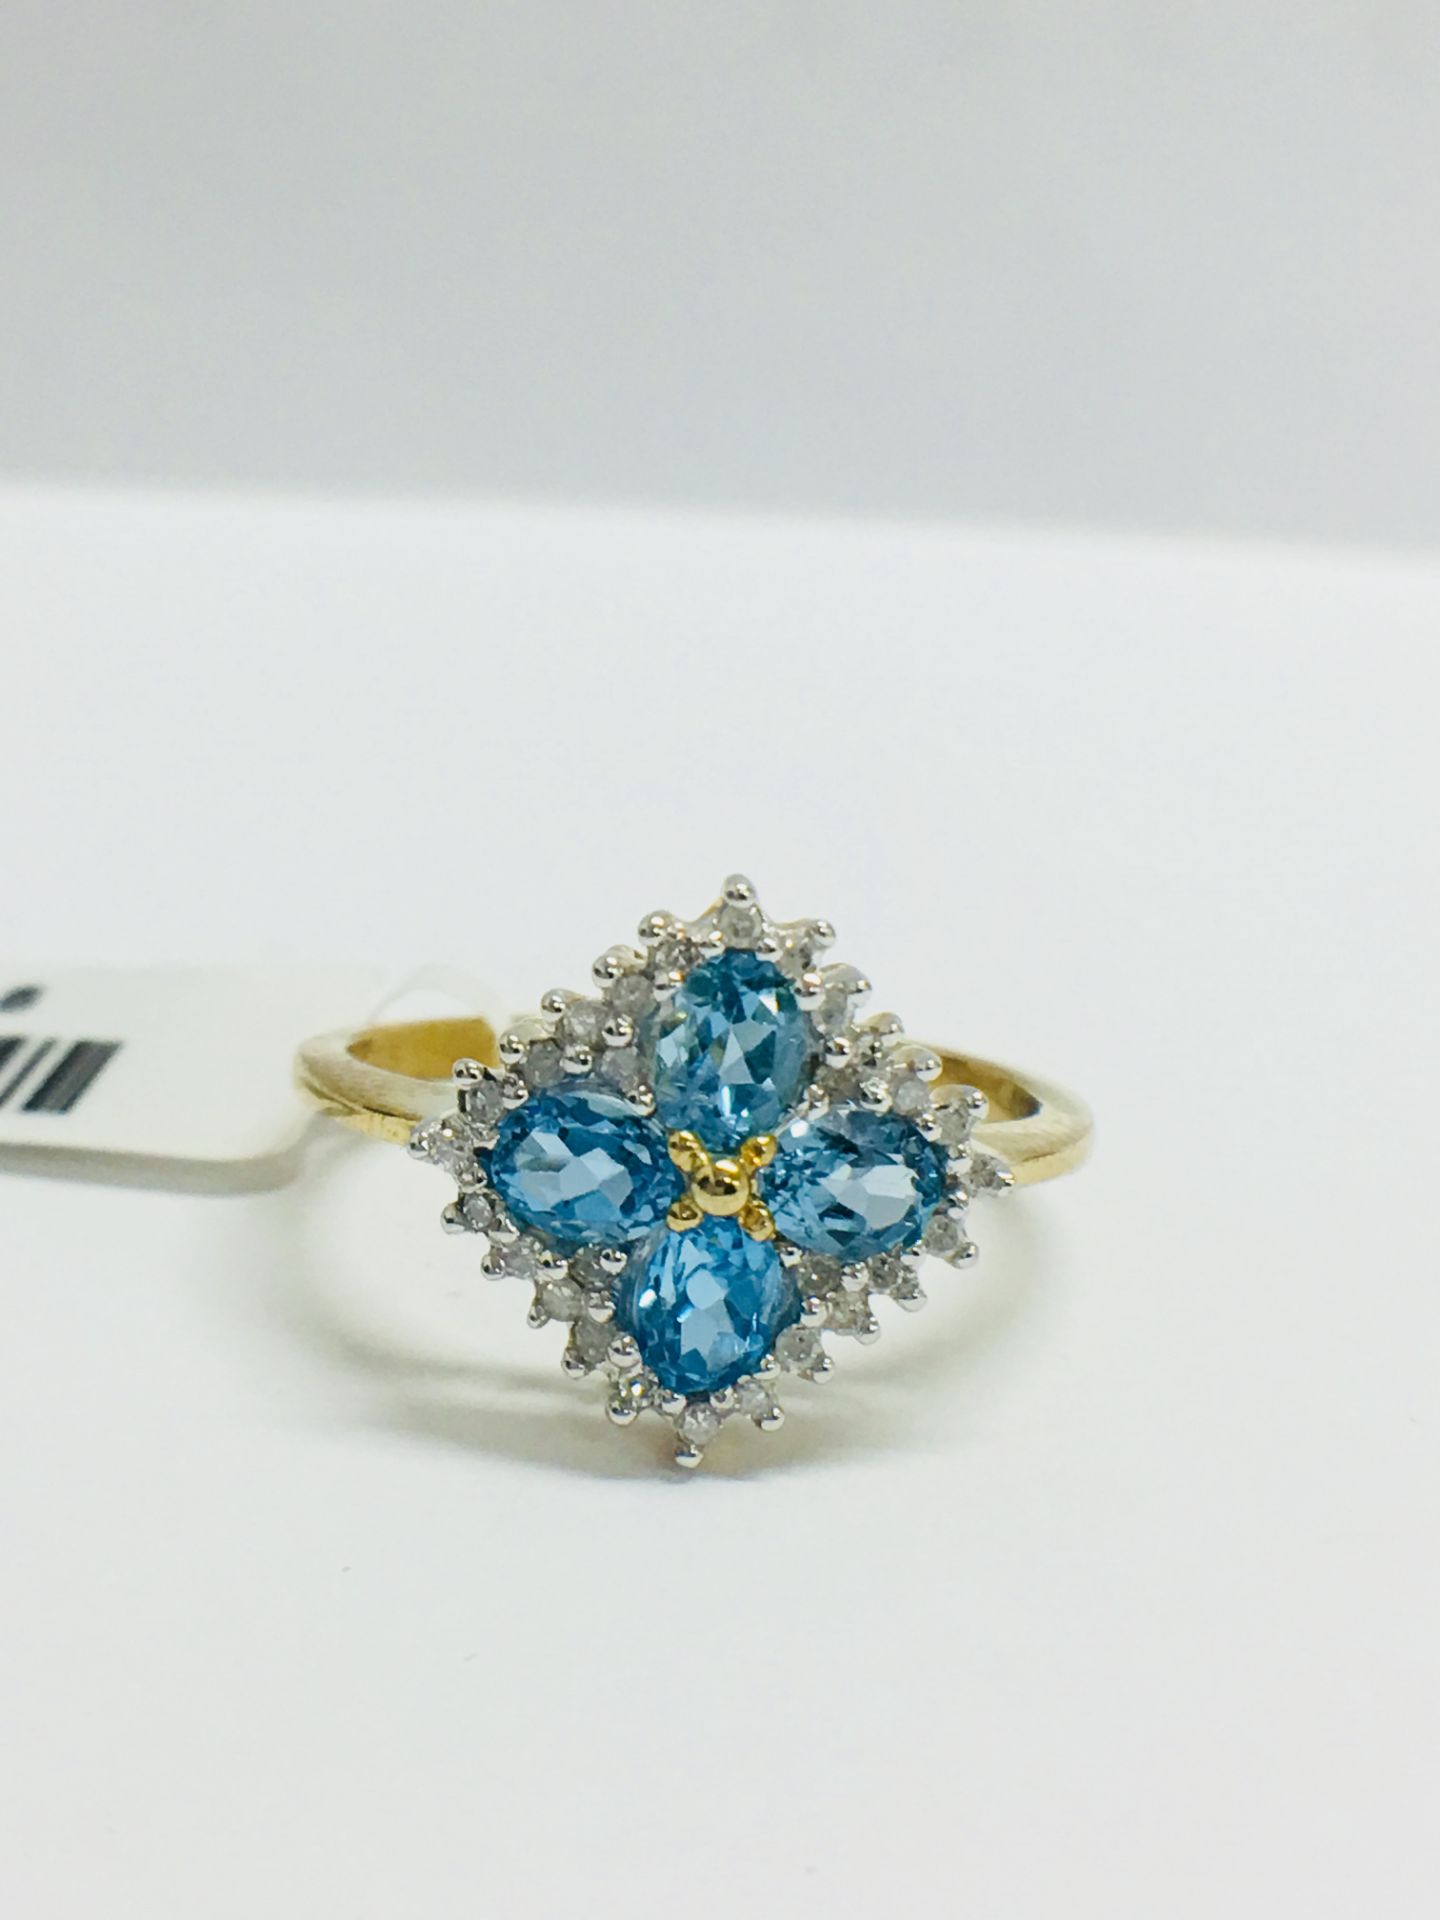 9ct Yellow Gold Blue Topaz Diamond Cluster Ring - Image 11 of 12